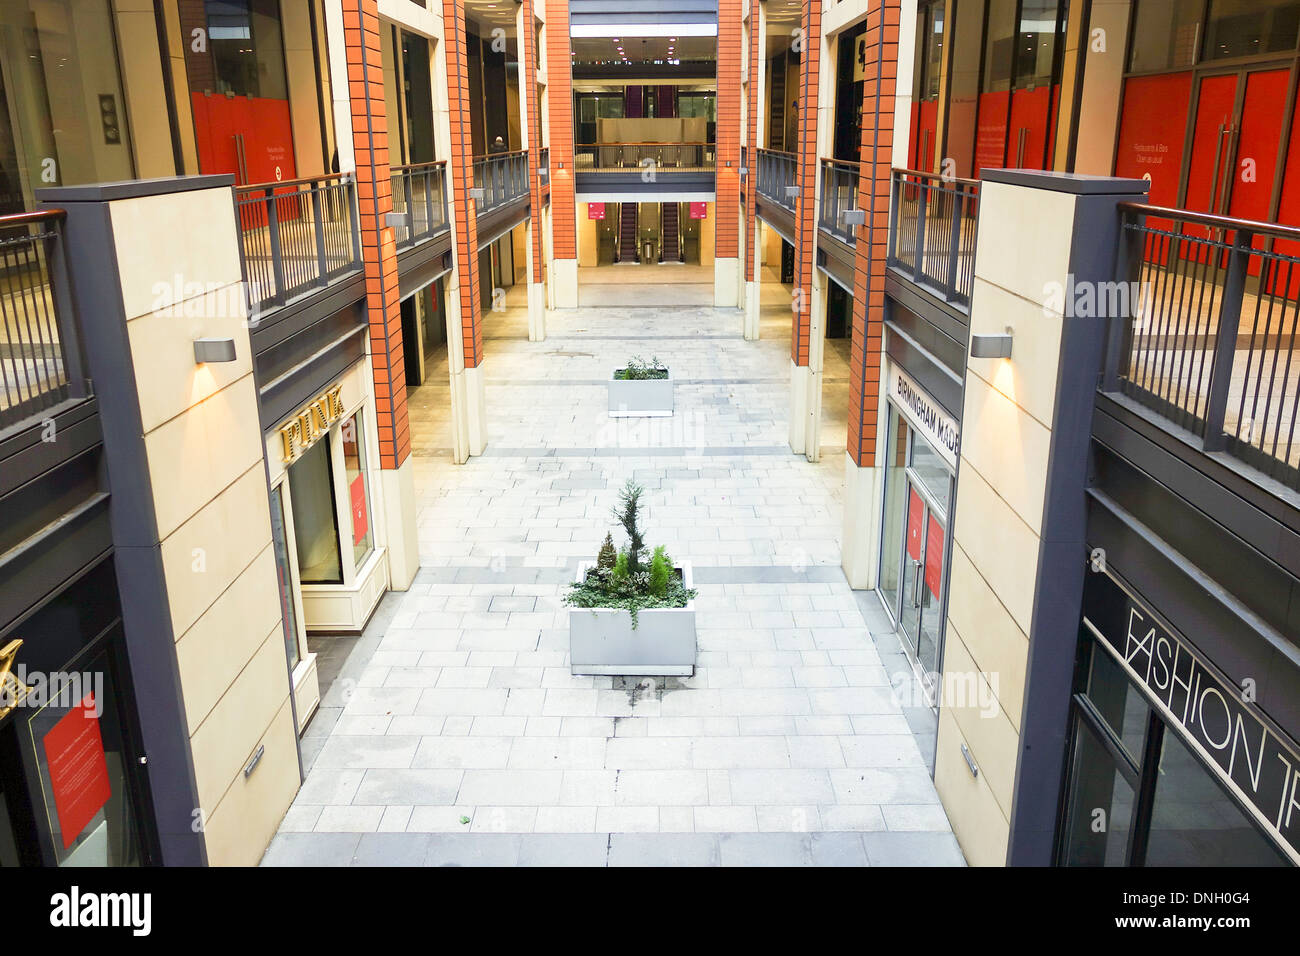 Inside of the Mailbox shopping centre in Birmingham UK Stock Photo - Alamy